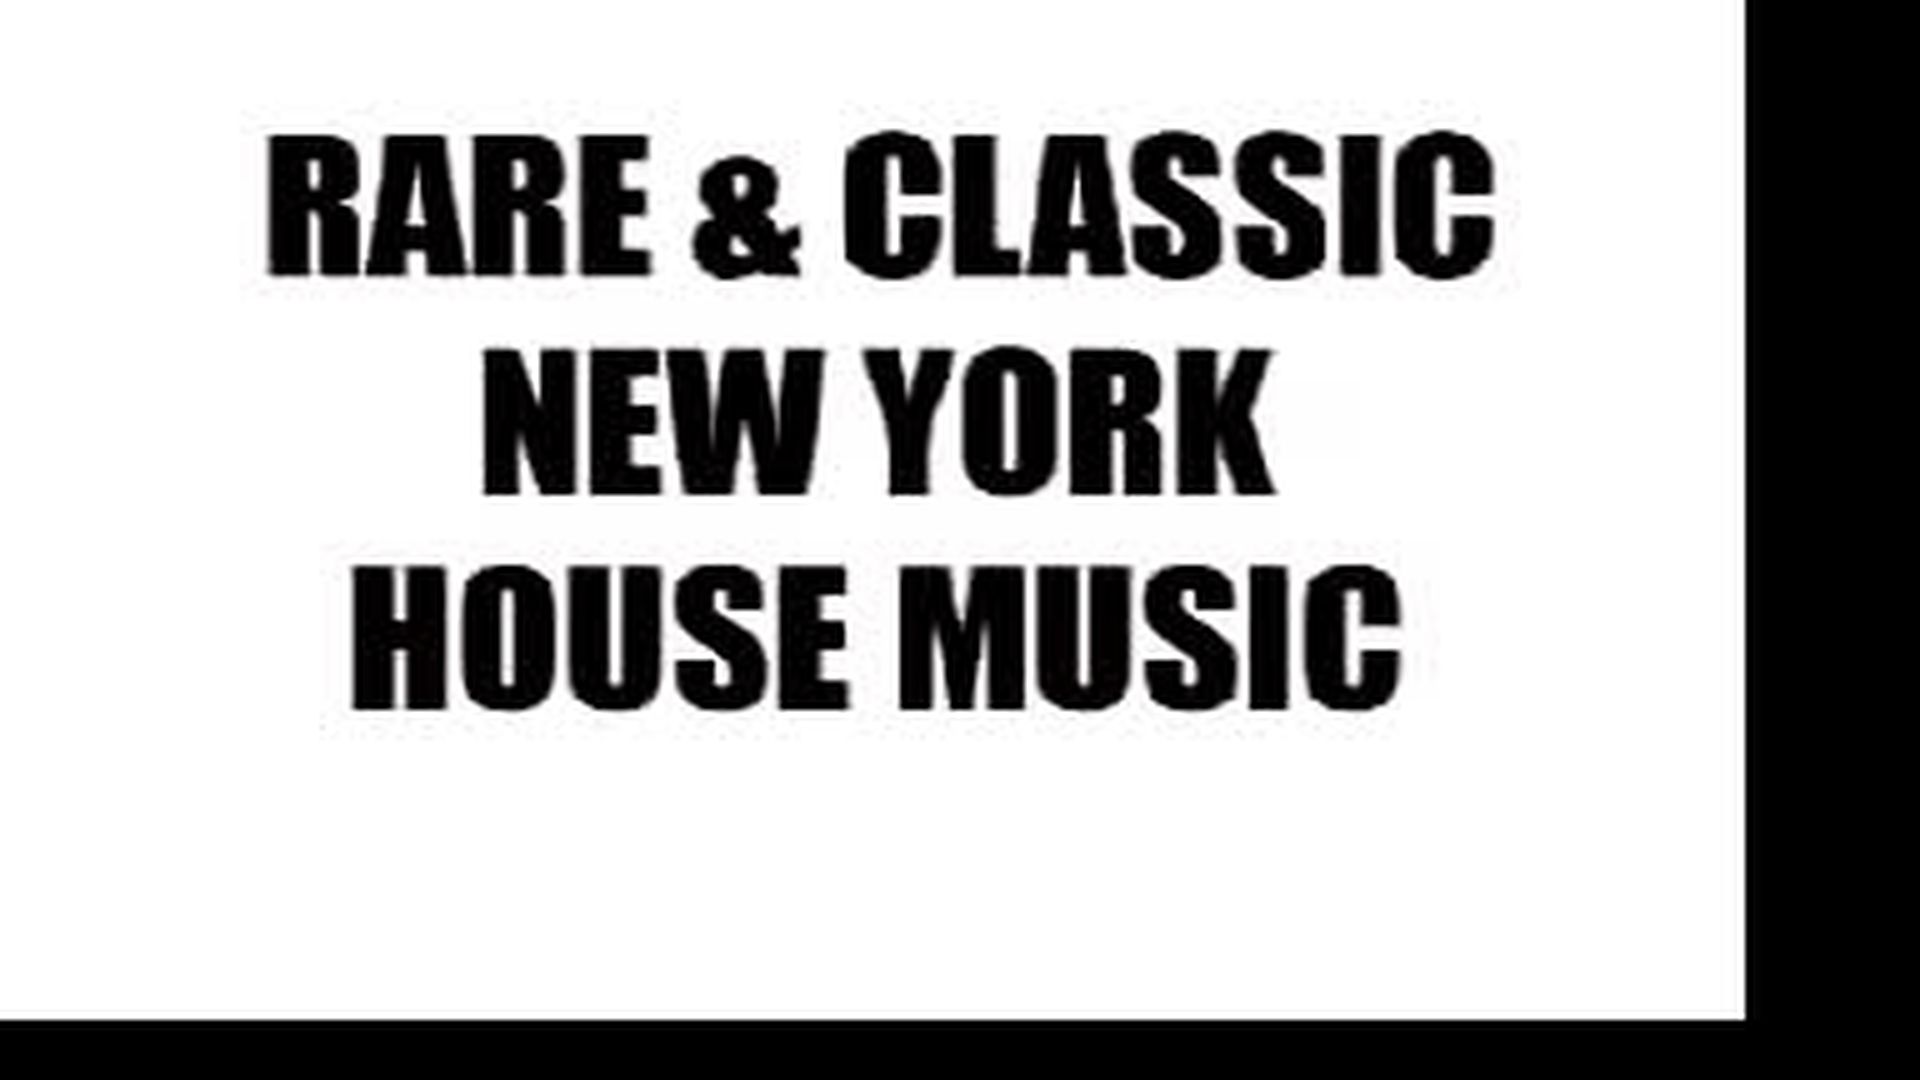 Classic Underground New York House Music DJ Mix (Mixed by Jeremy Sylvester - Love House Records)